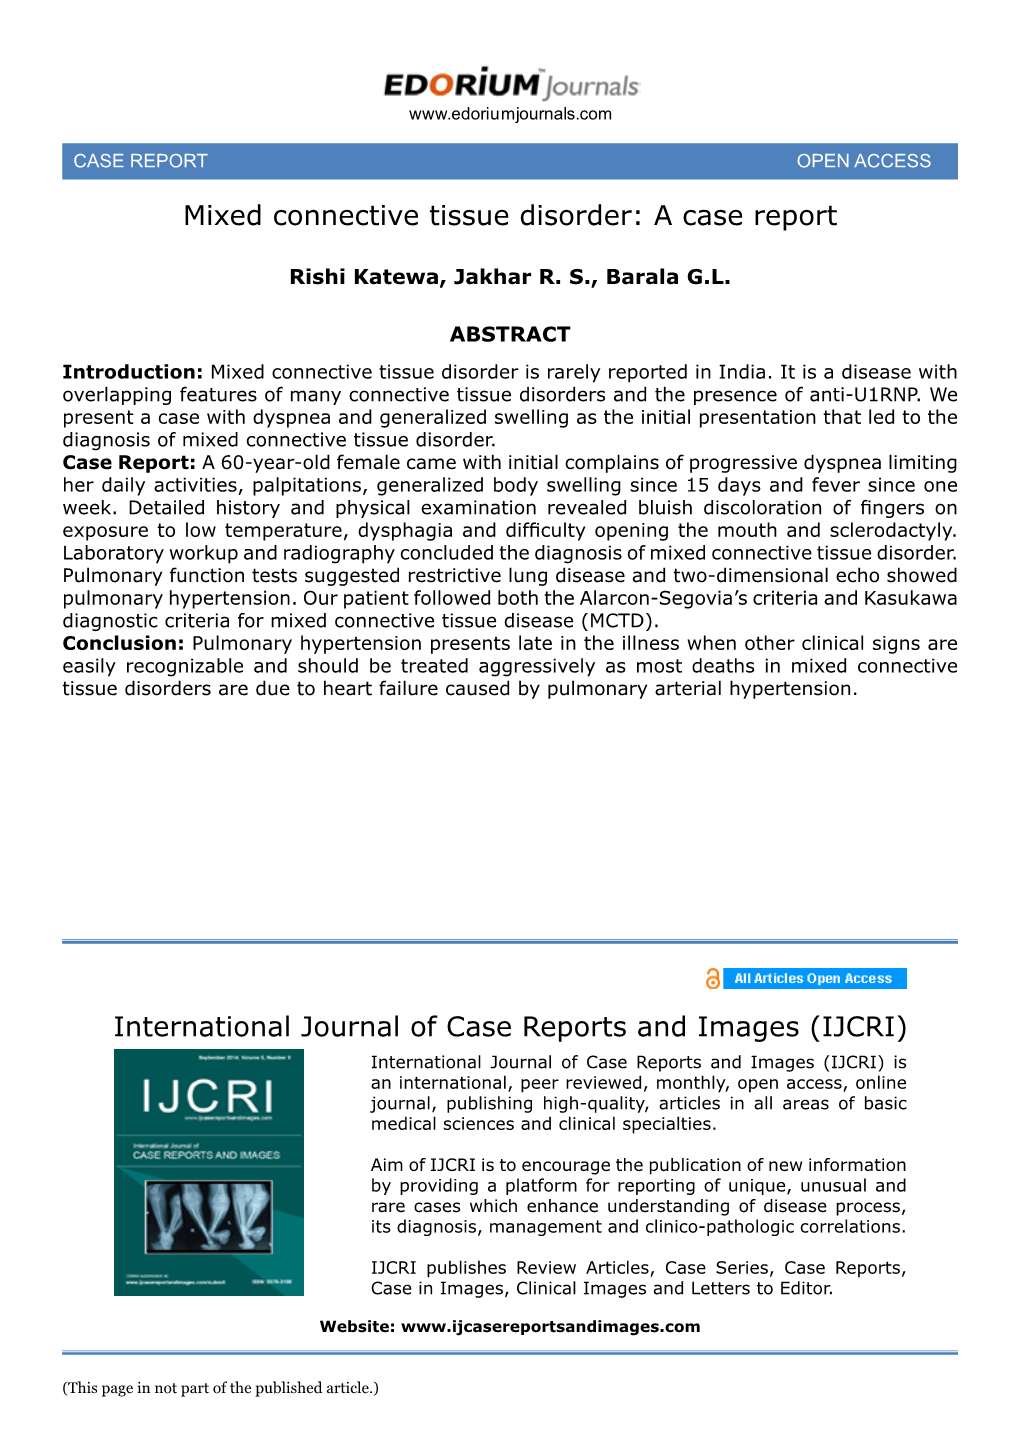 Mixed Connective Tissue Disorder: a Case Report